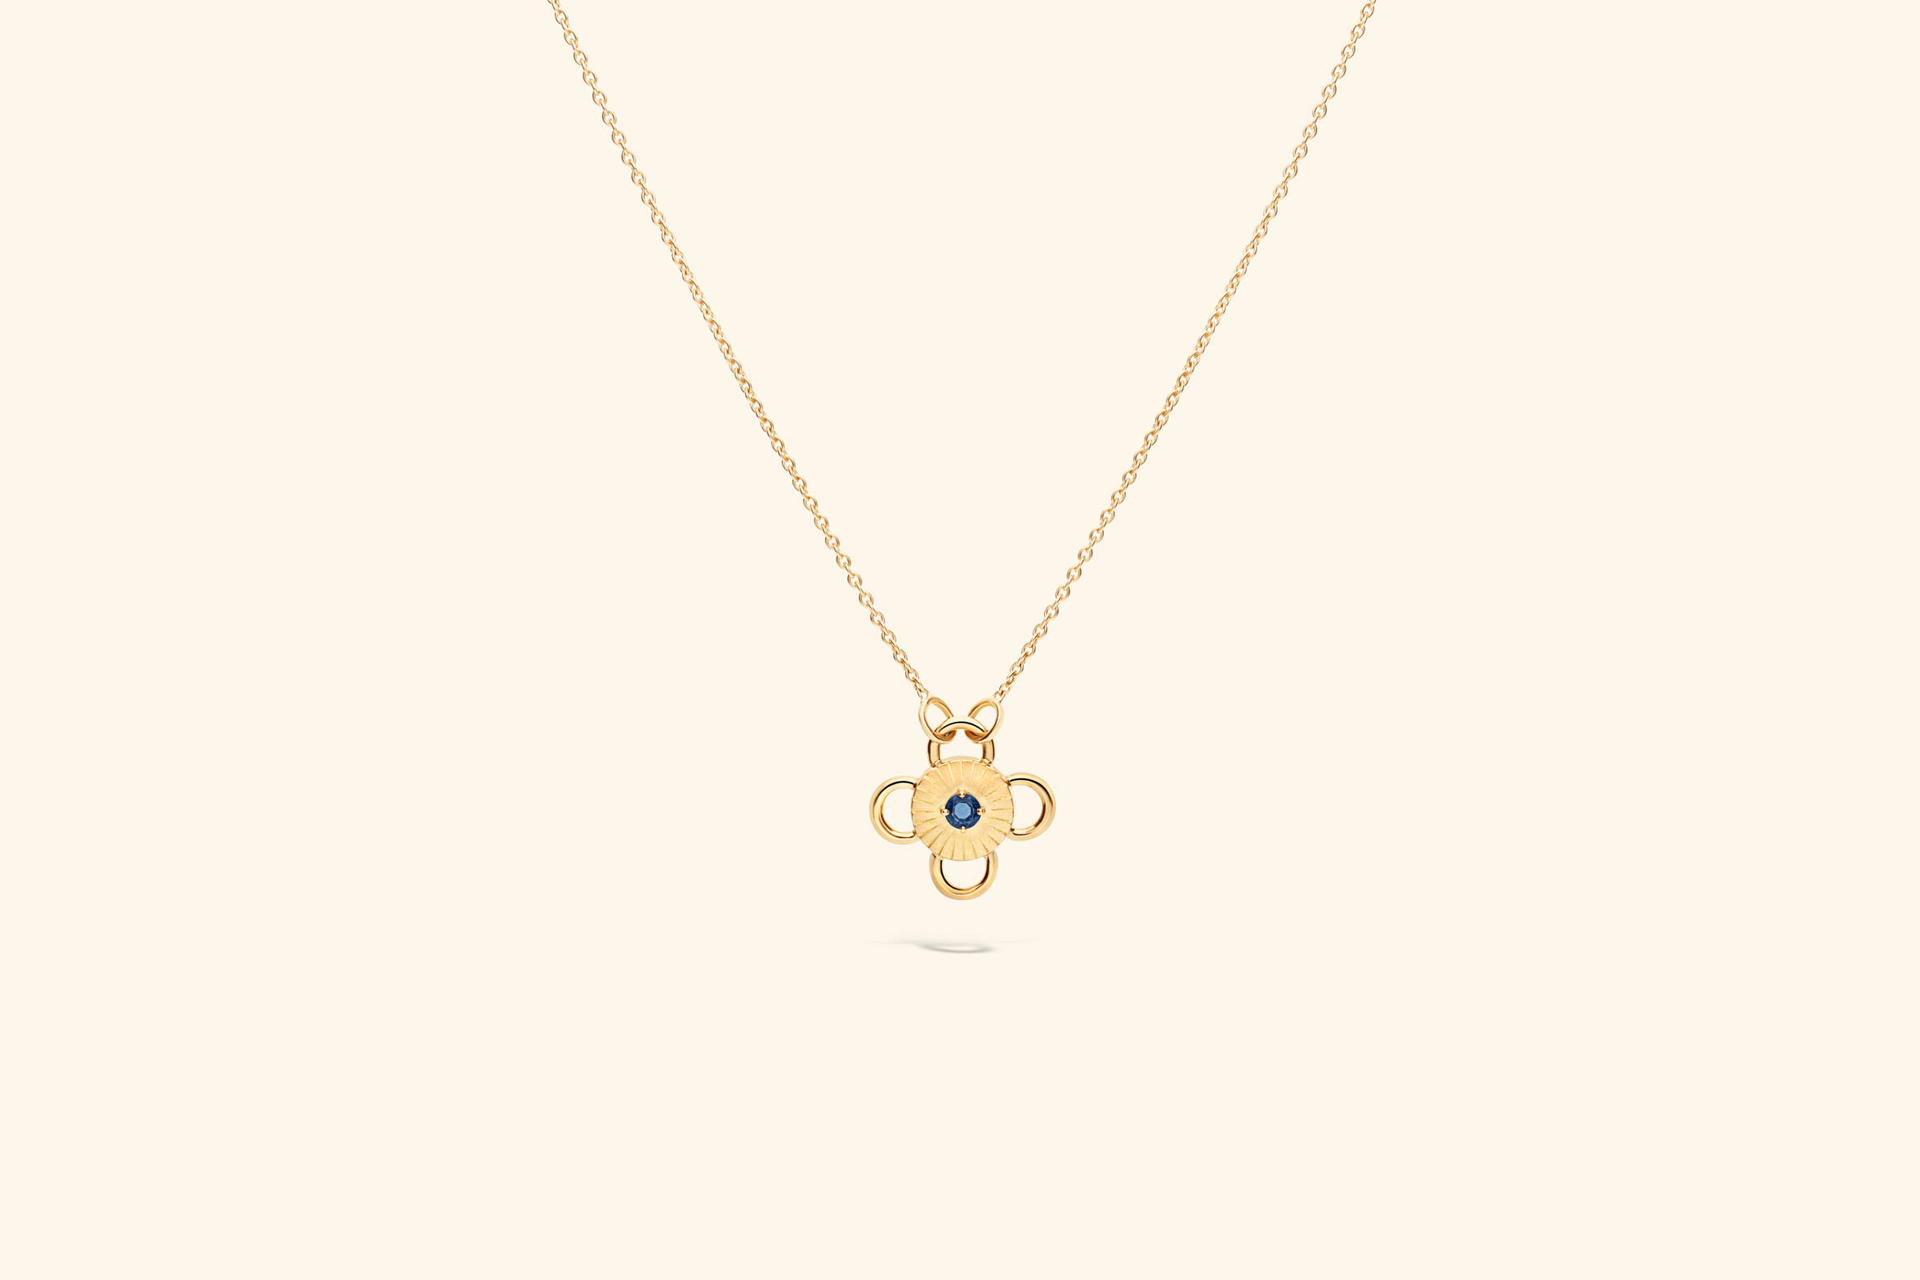 Baby Bolt Necklacea ~0.04 carat sapphire set in recycled 18k yellow gold.